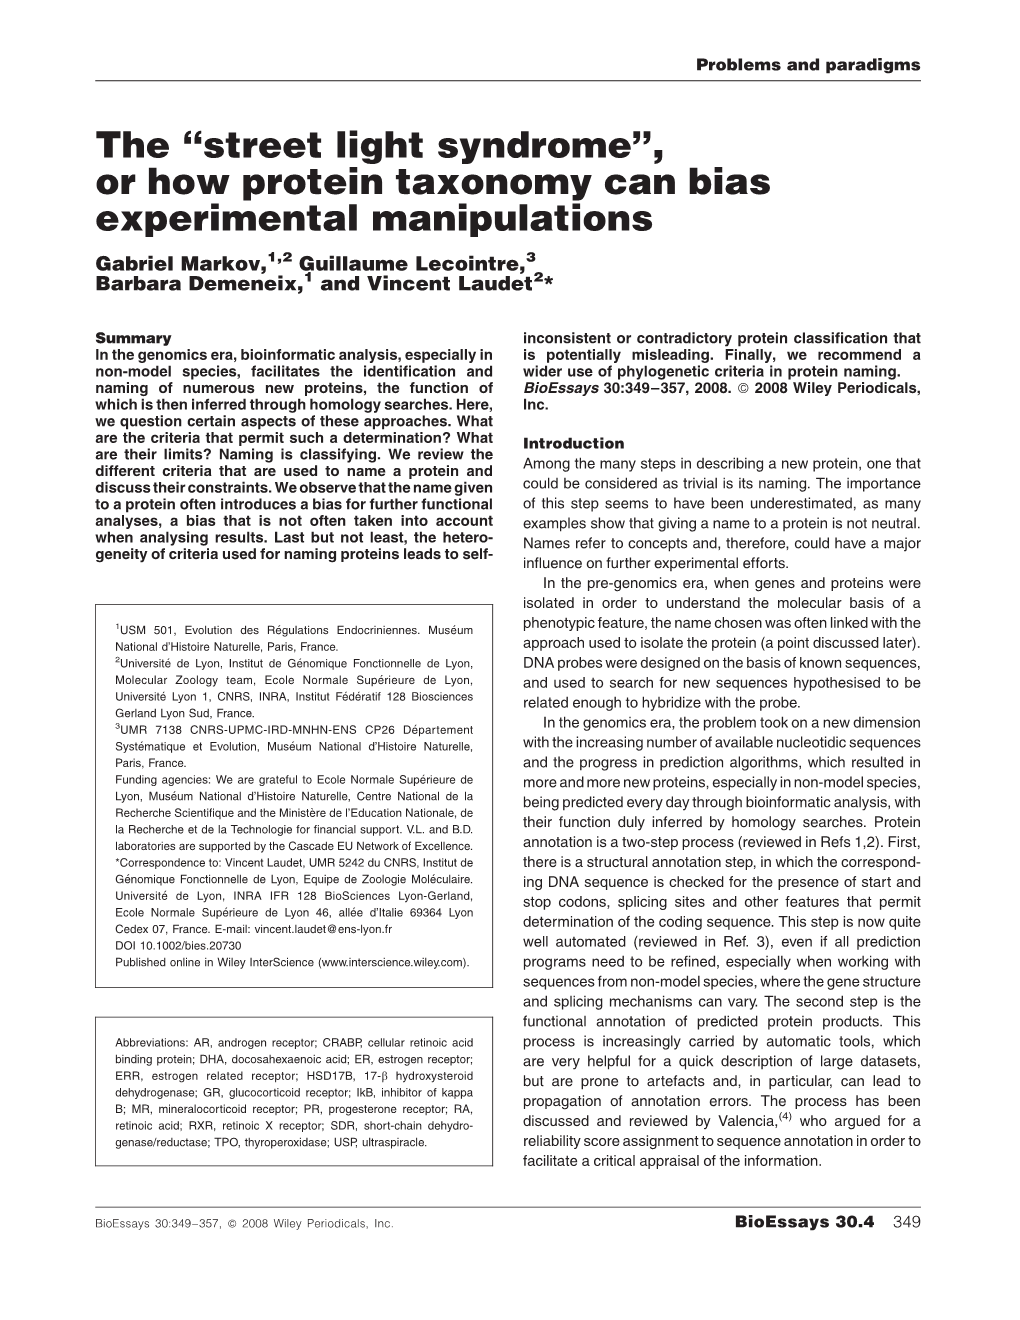 Or How Protein Taxonomy Can Bias Experimental Manipulations Gabriel Markov,1,2 Guillaume Lecointre,3 Barbara Demeneix,1 and Vincent Laudet2*